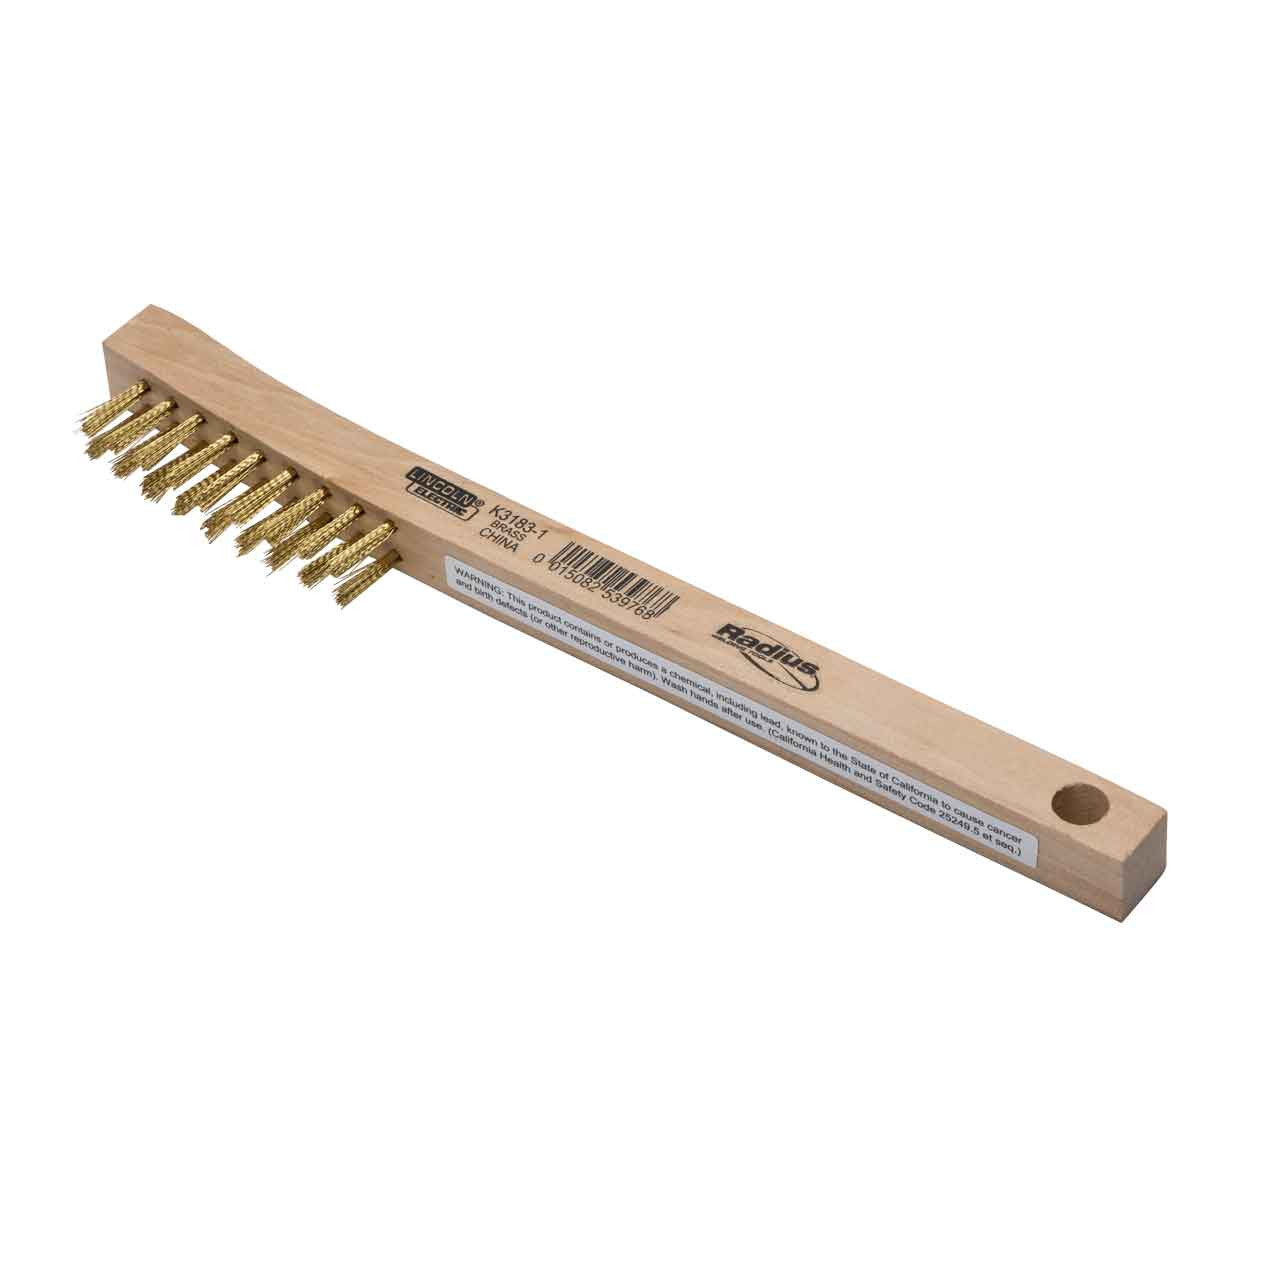 Lincoln Electric K3183-1 Brass Wire Brush for Aluminum, 2 x 9 Row